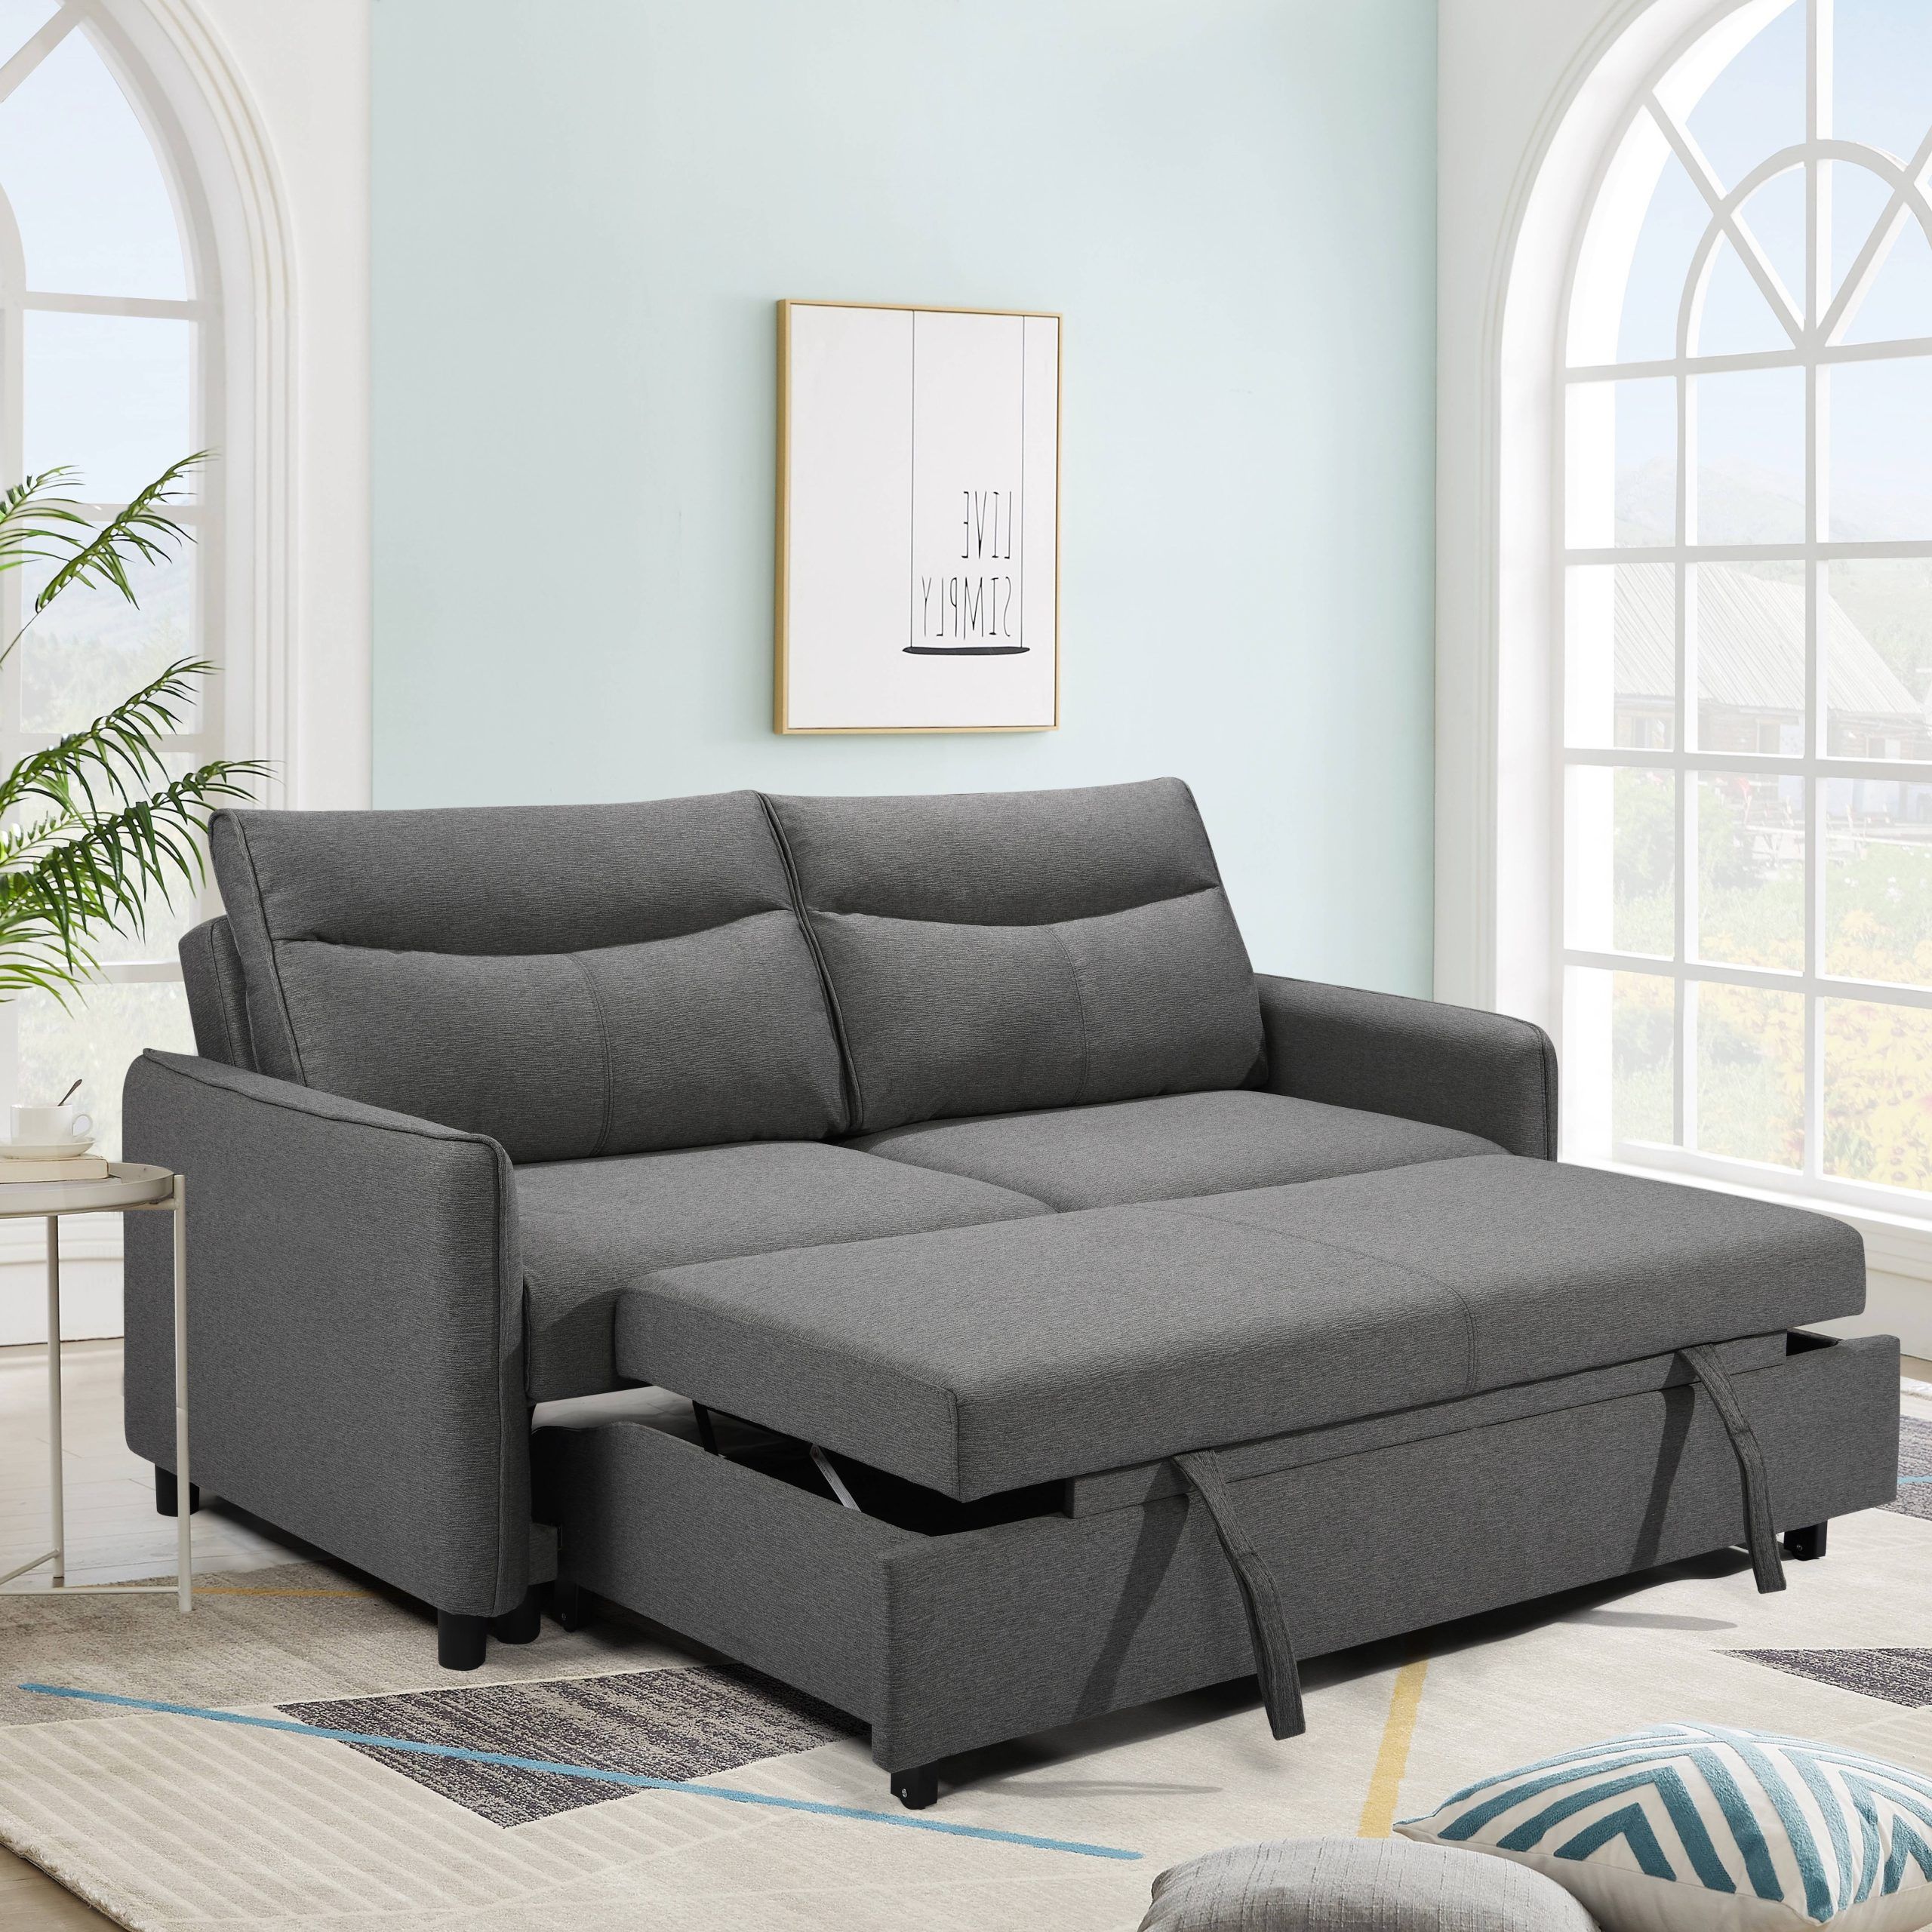 3 In 1 Convertible Sleeper Sofa Bed, Modern Velvet Loveseat Futon Sofa Couch  With Pullout Bed, Small Love Seat Lounge Sofa With Reclining Backrest,toss  Pillows, Pockets, Furniture For Living Room,gray – Walmart Pertaining To 3 In 1 Gray Pull Out Sleeper Sofas (View 8 of 15)